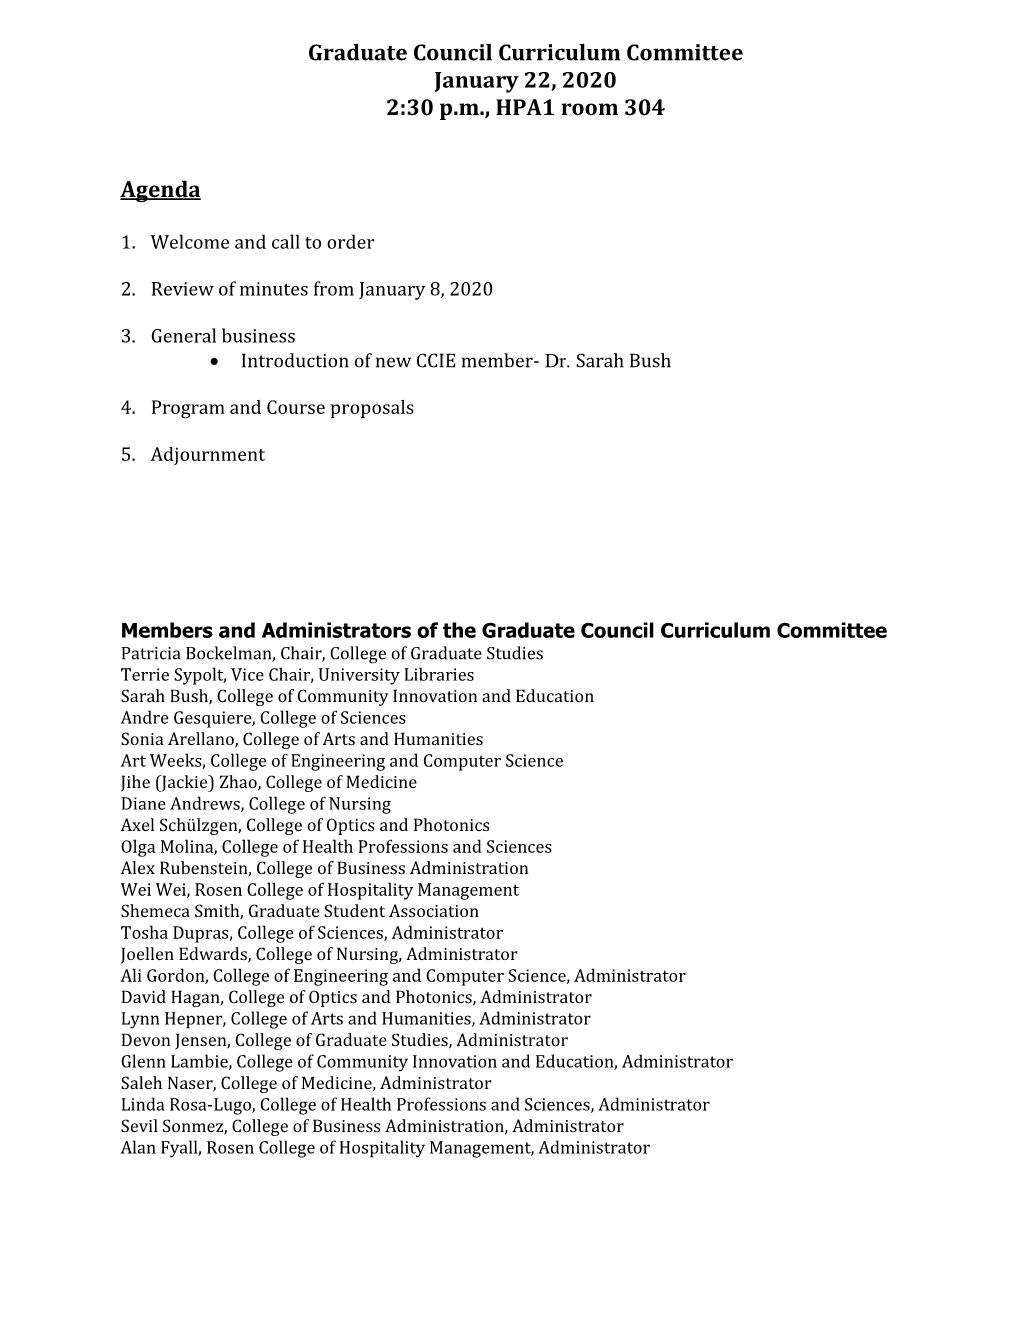 Graduate Council Curriculum Committee January 22, 2020 2:30 P.M., HPA1 Room 304